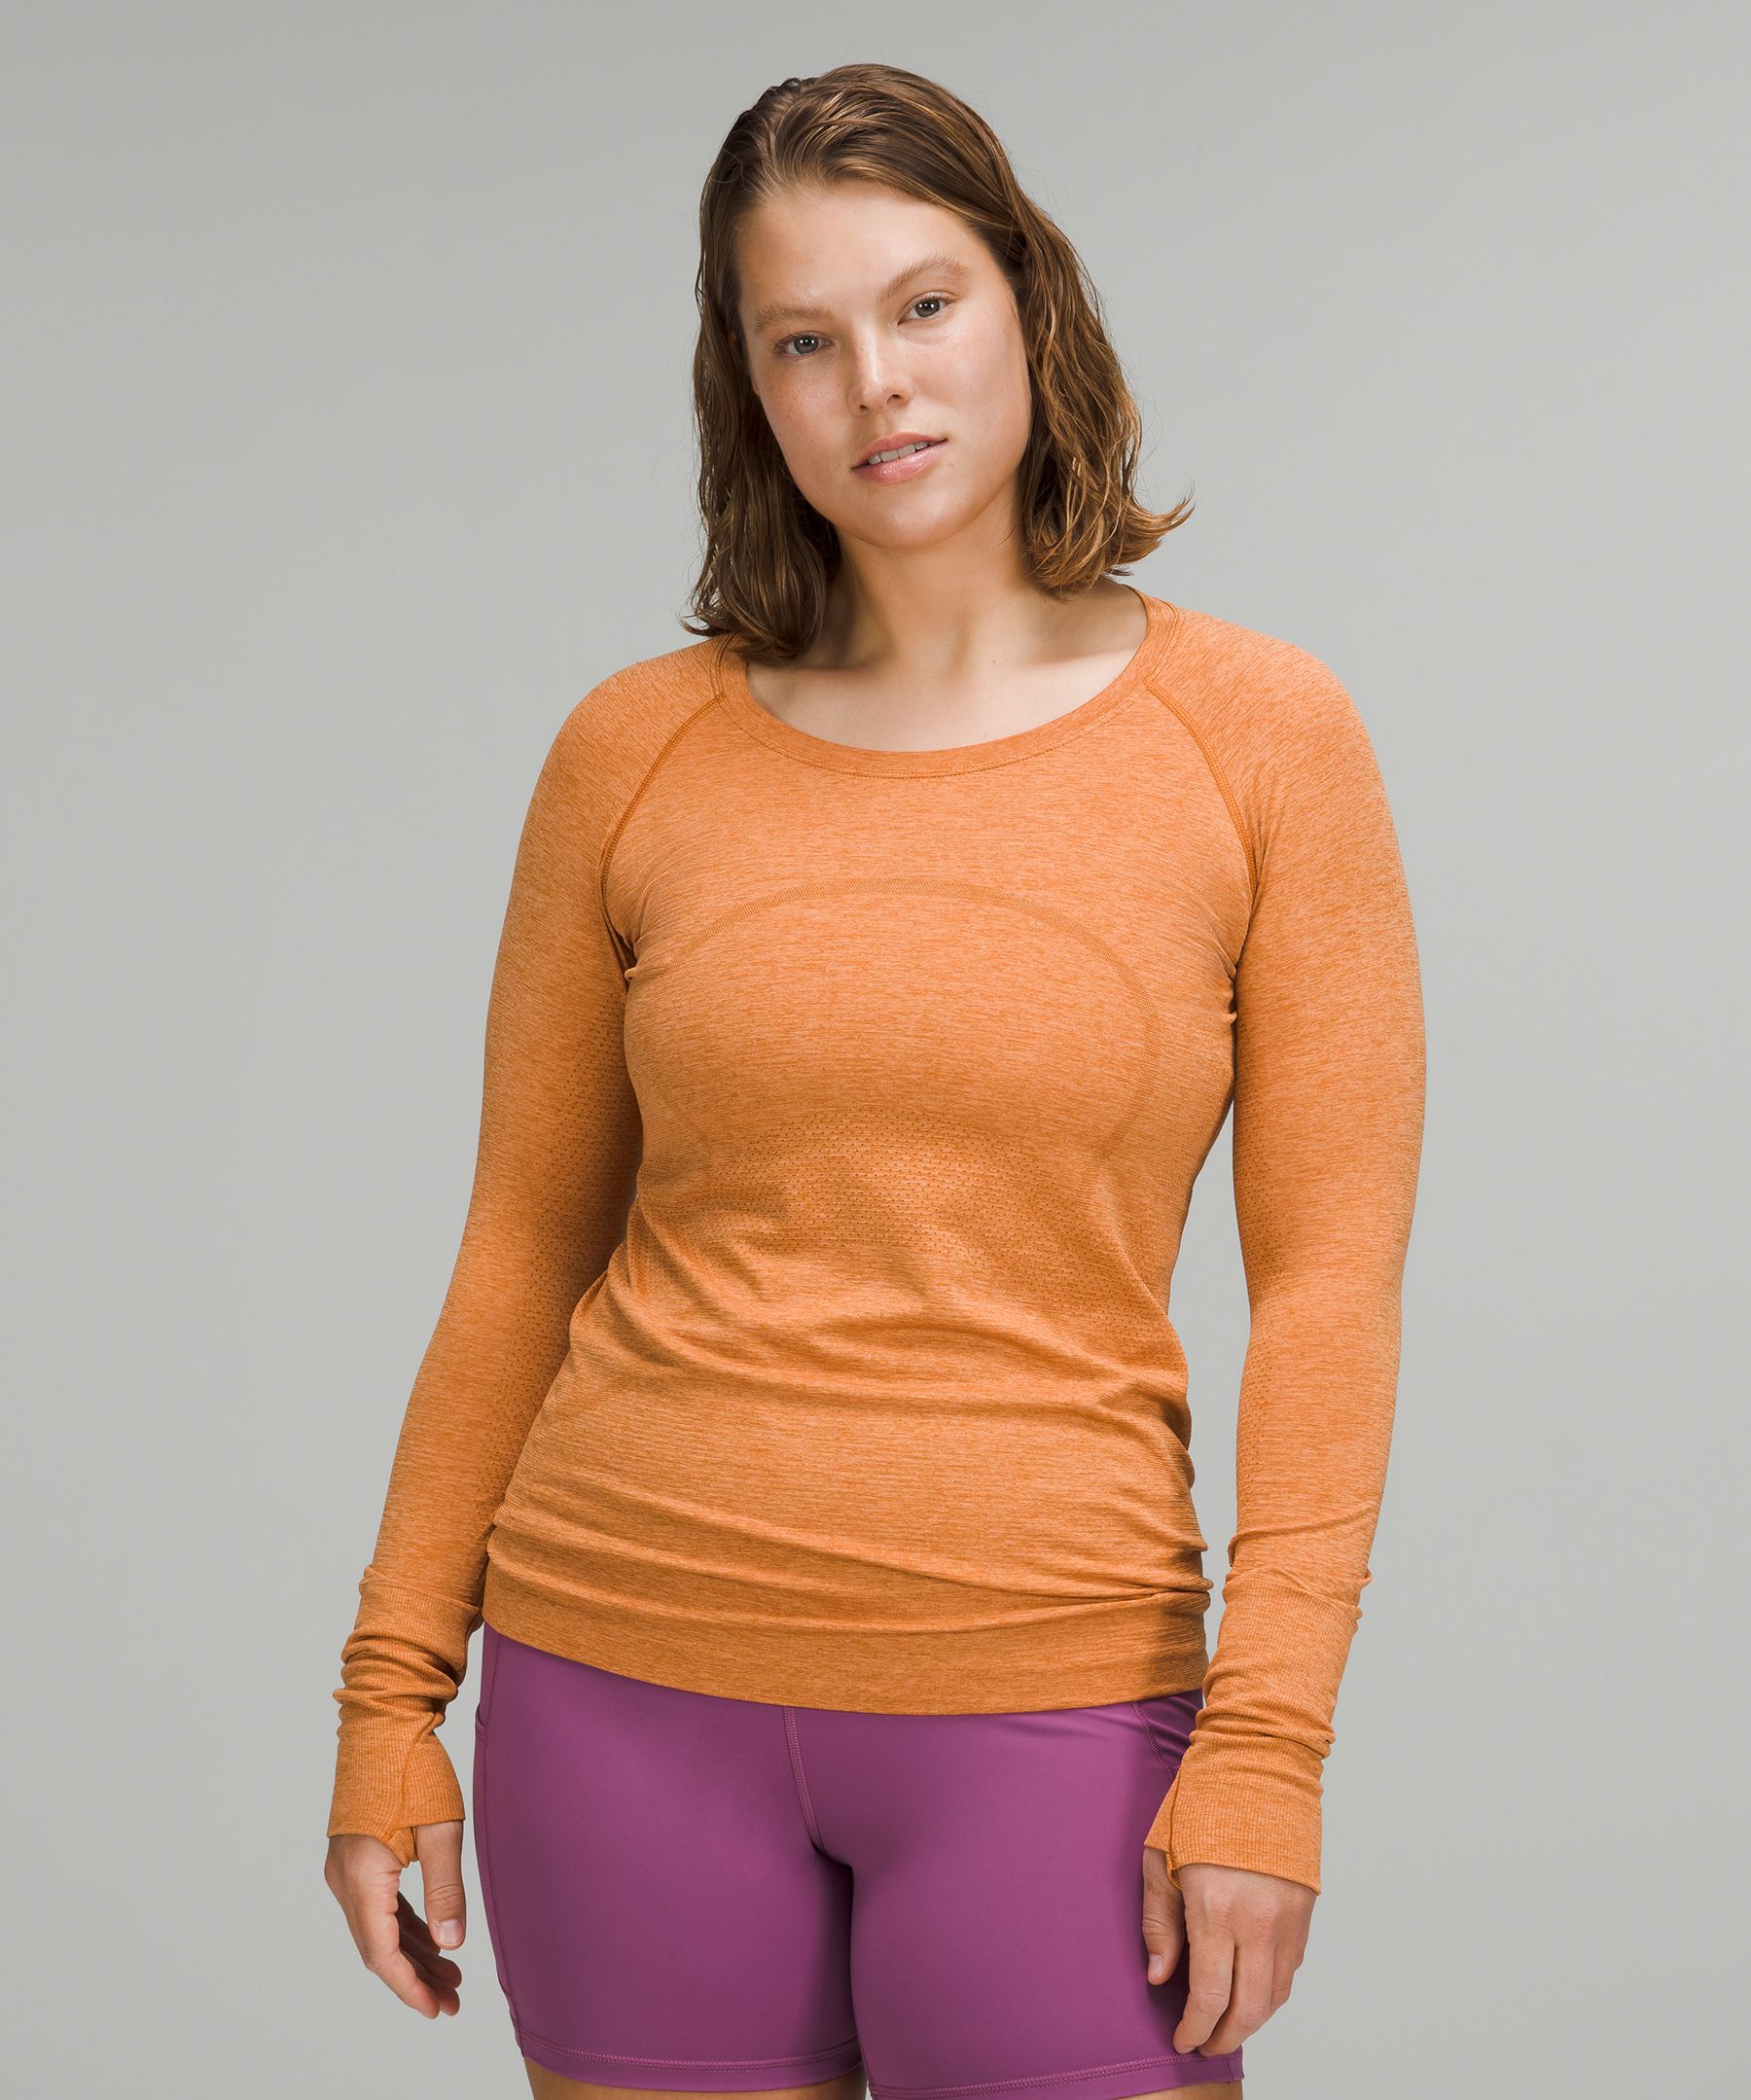 Wunder Under 25 in Parallel Stripe (6), Swiftly Tech Long Sleeve 2.0 in  Black (8), & Soft Ambitions Crop in Heathered Beechwood (L/XL) : r/lululemon